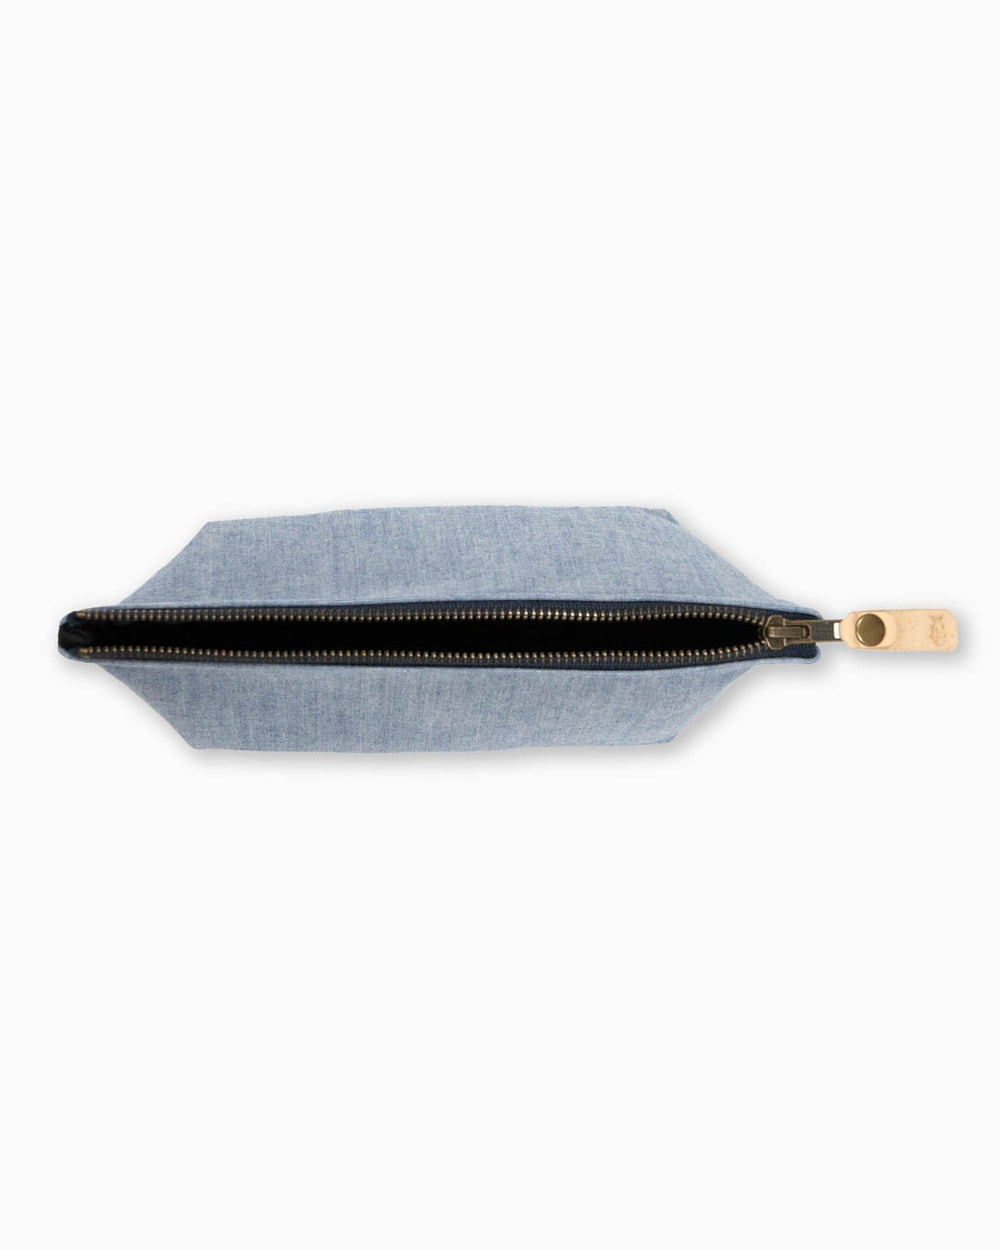 The detail view of the Southern Tide Denim Travel Clutch by Southern Tide - Navy